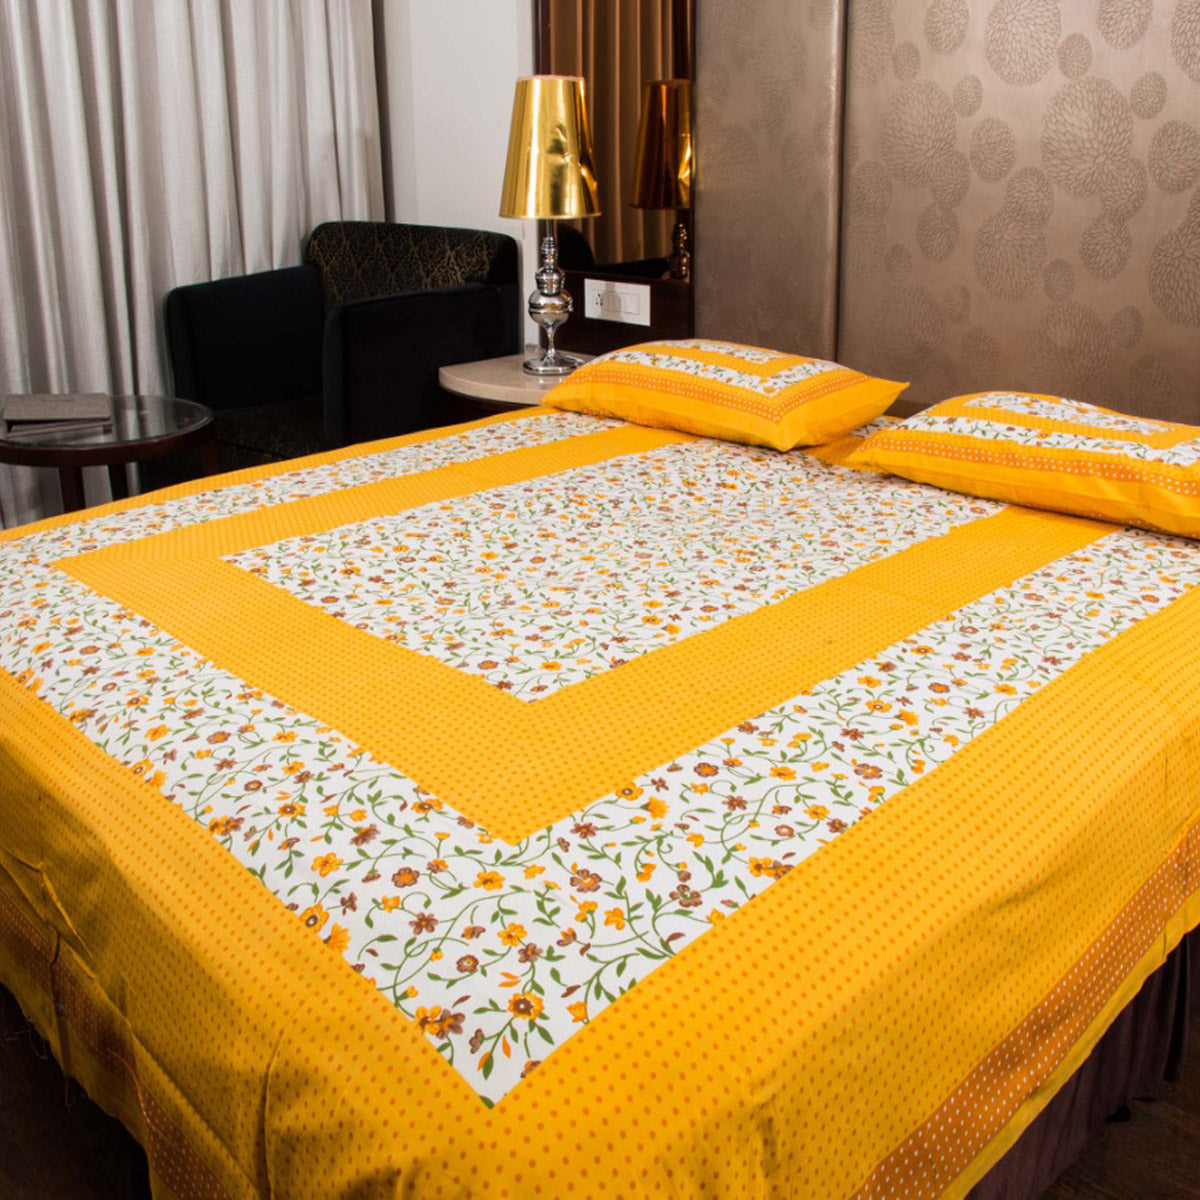 Organic Vibes Latest Yellow Floral Block Printed Bed Cover with Pillows